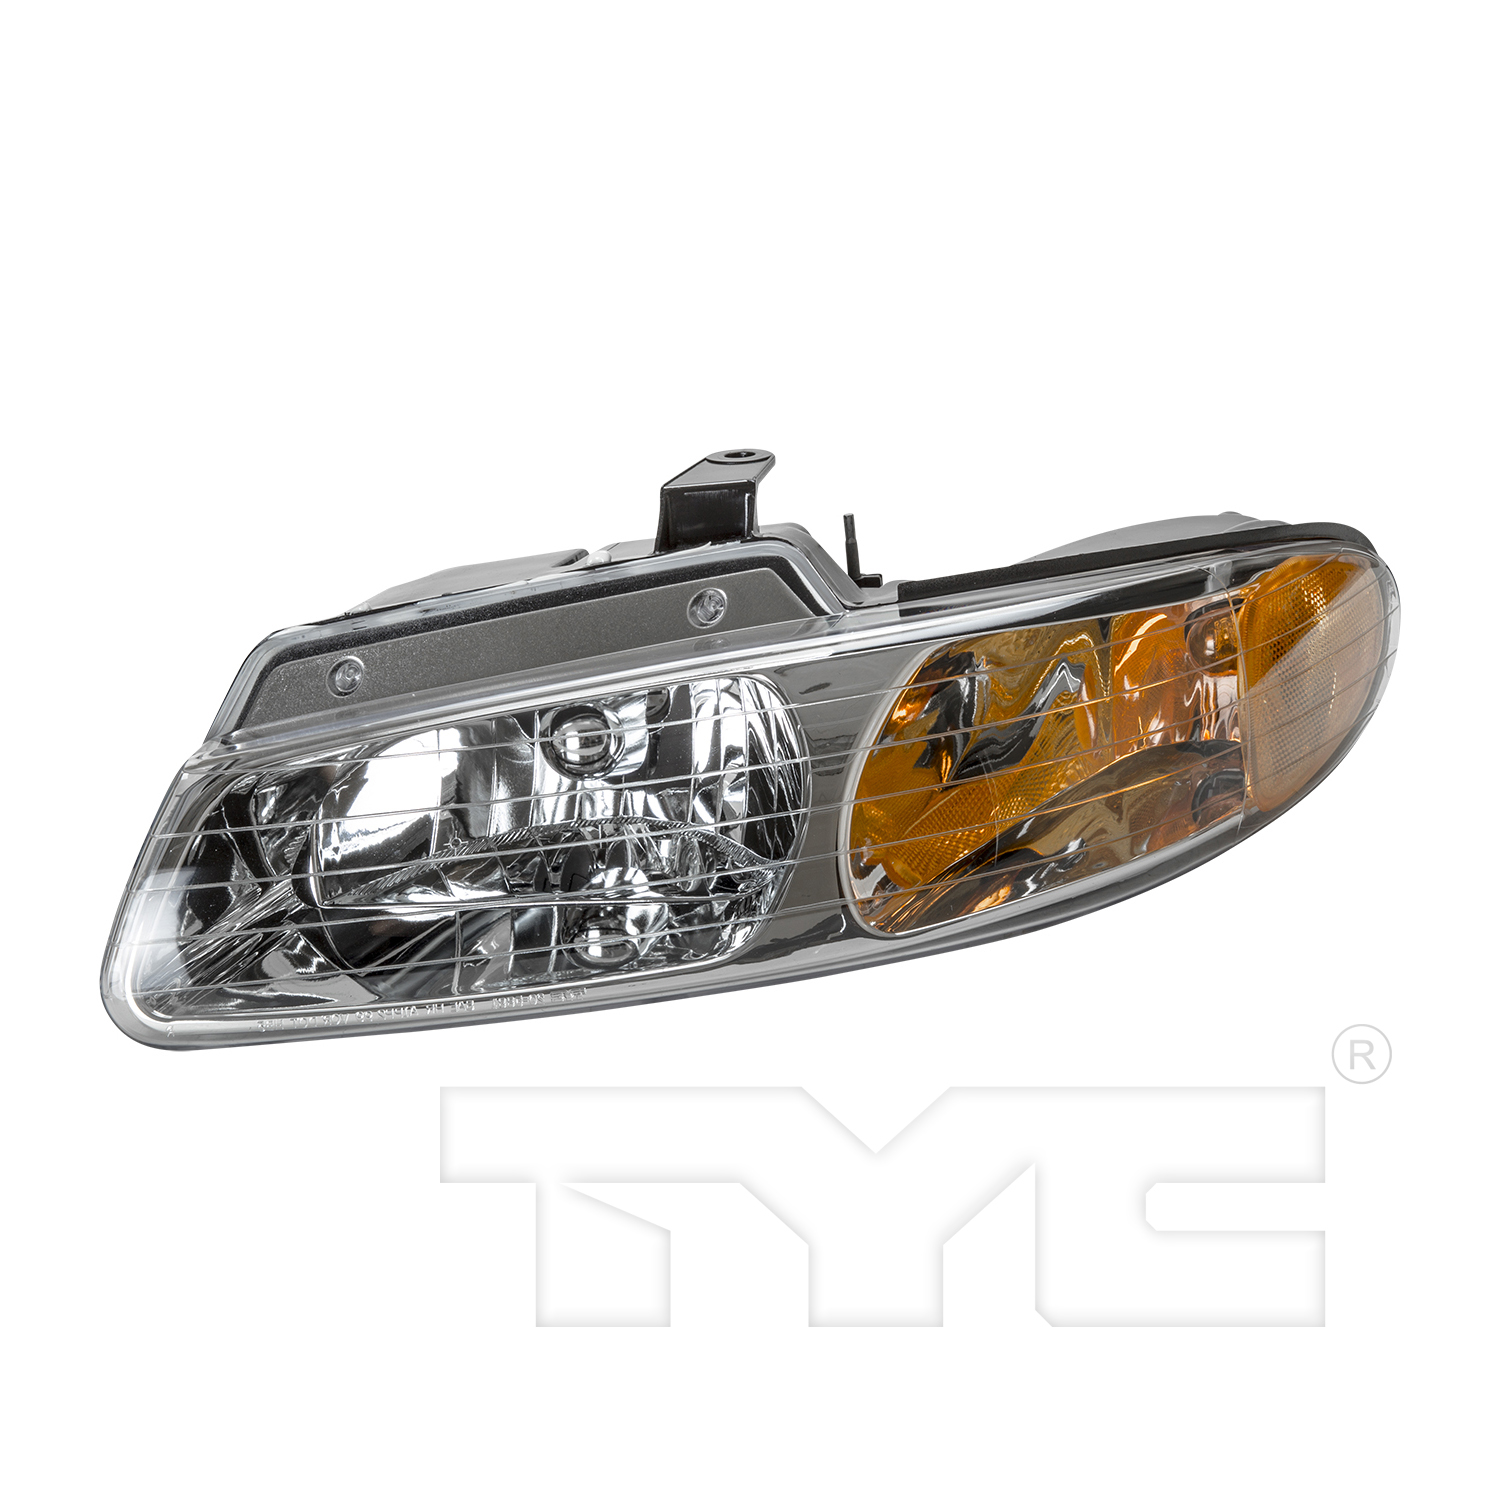 Aftermarket HEADLIGHTS for CHRYSLER - TOWN & COUNTRY, TOWN & COUNTRY,00-00,LT Headlamp assy composite